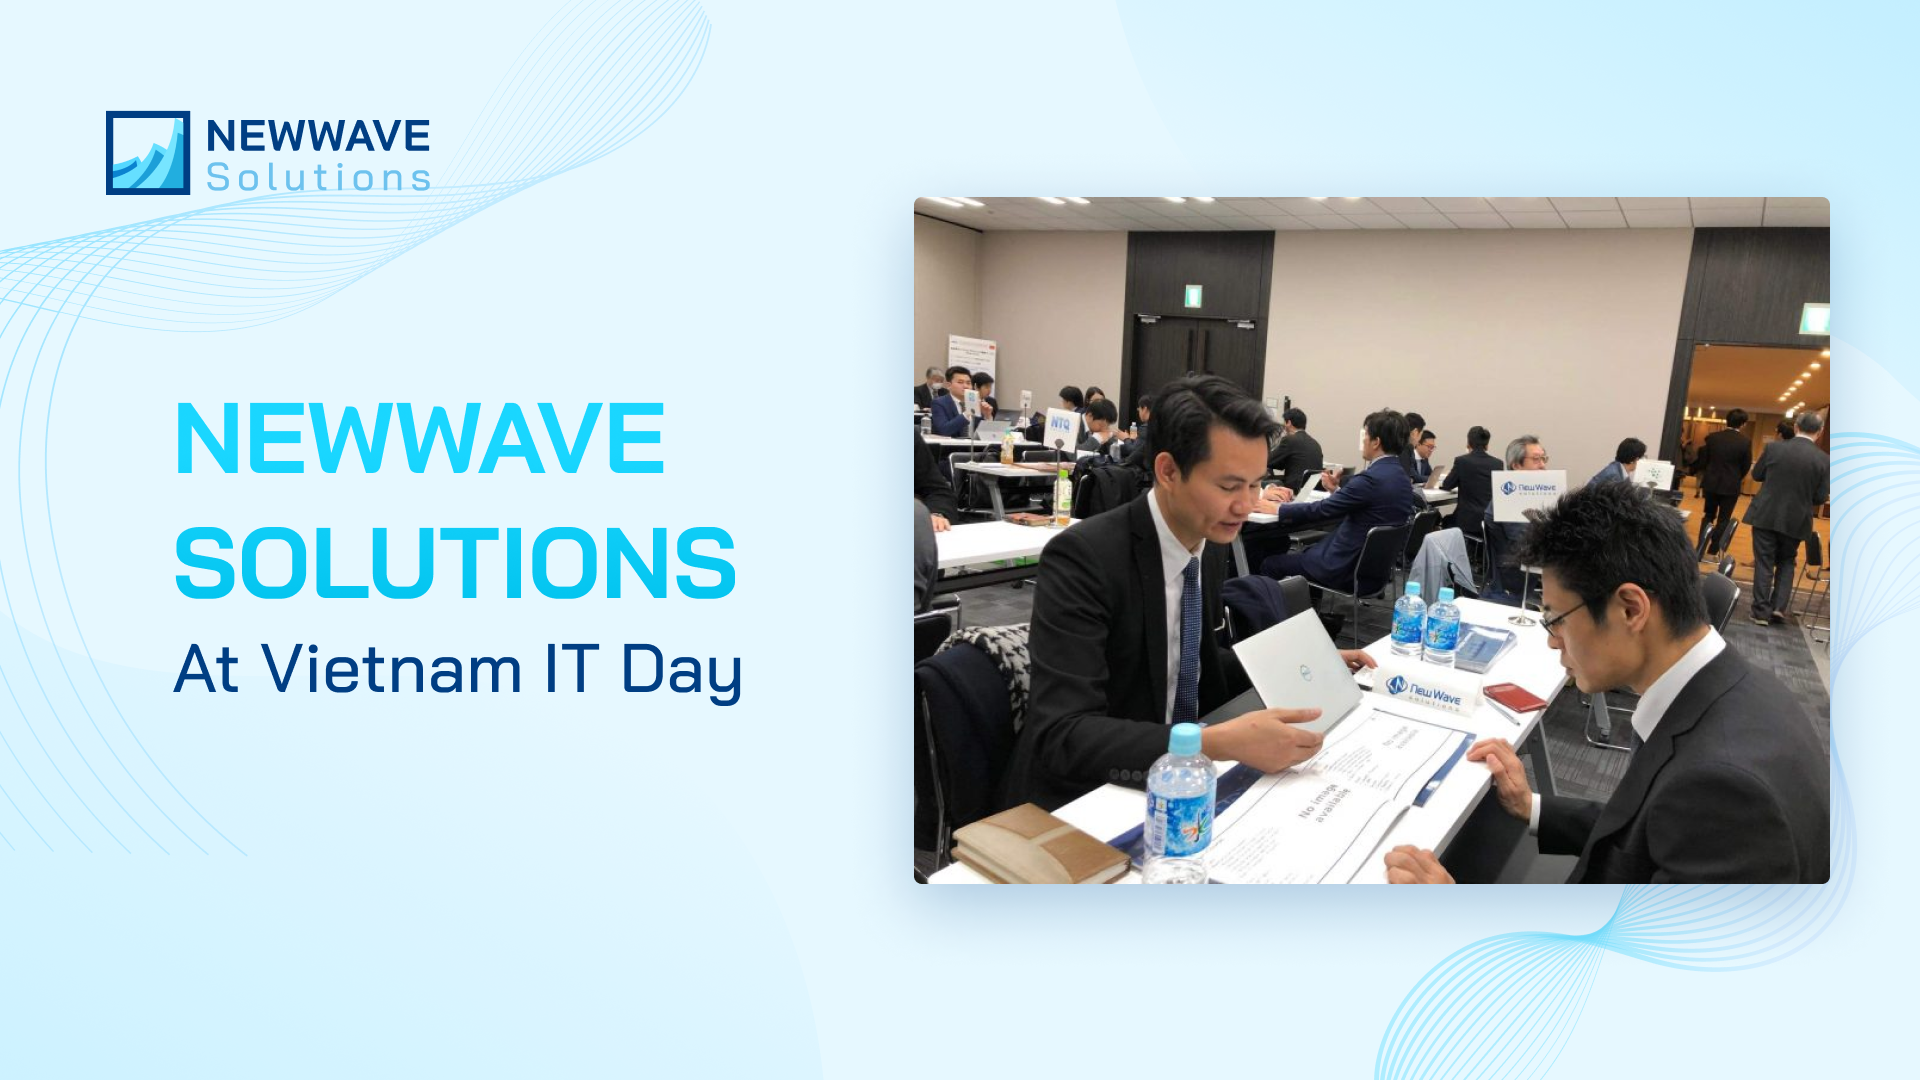 Newwave Solutions at Vietnam IT Day